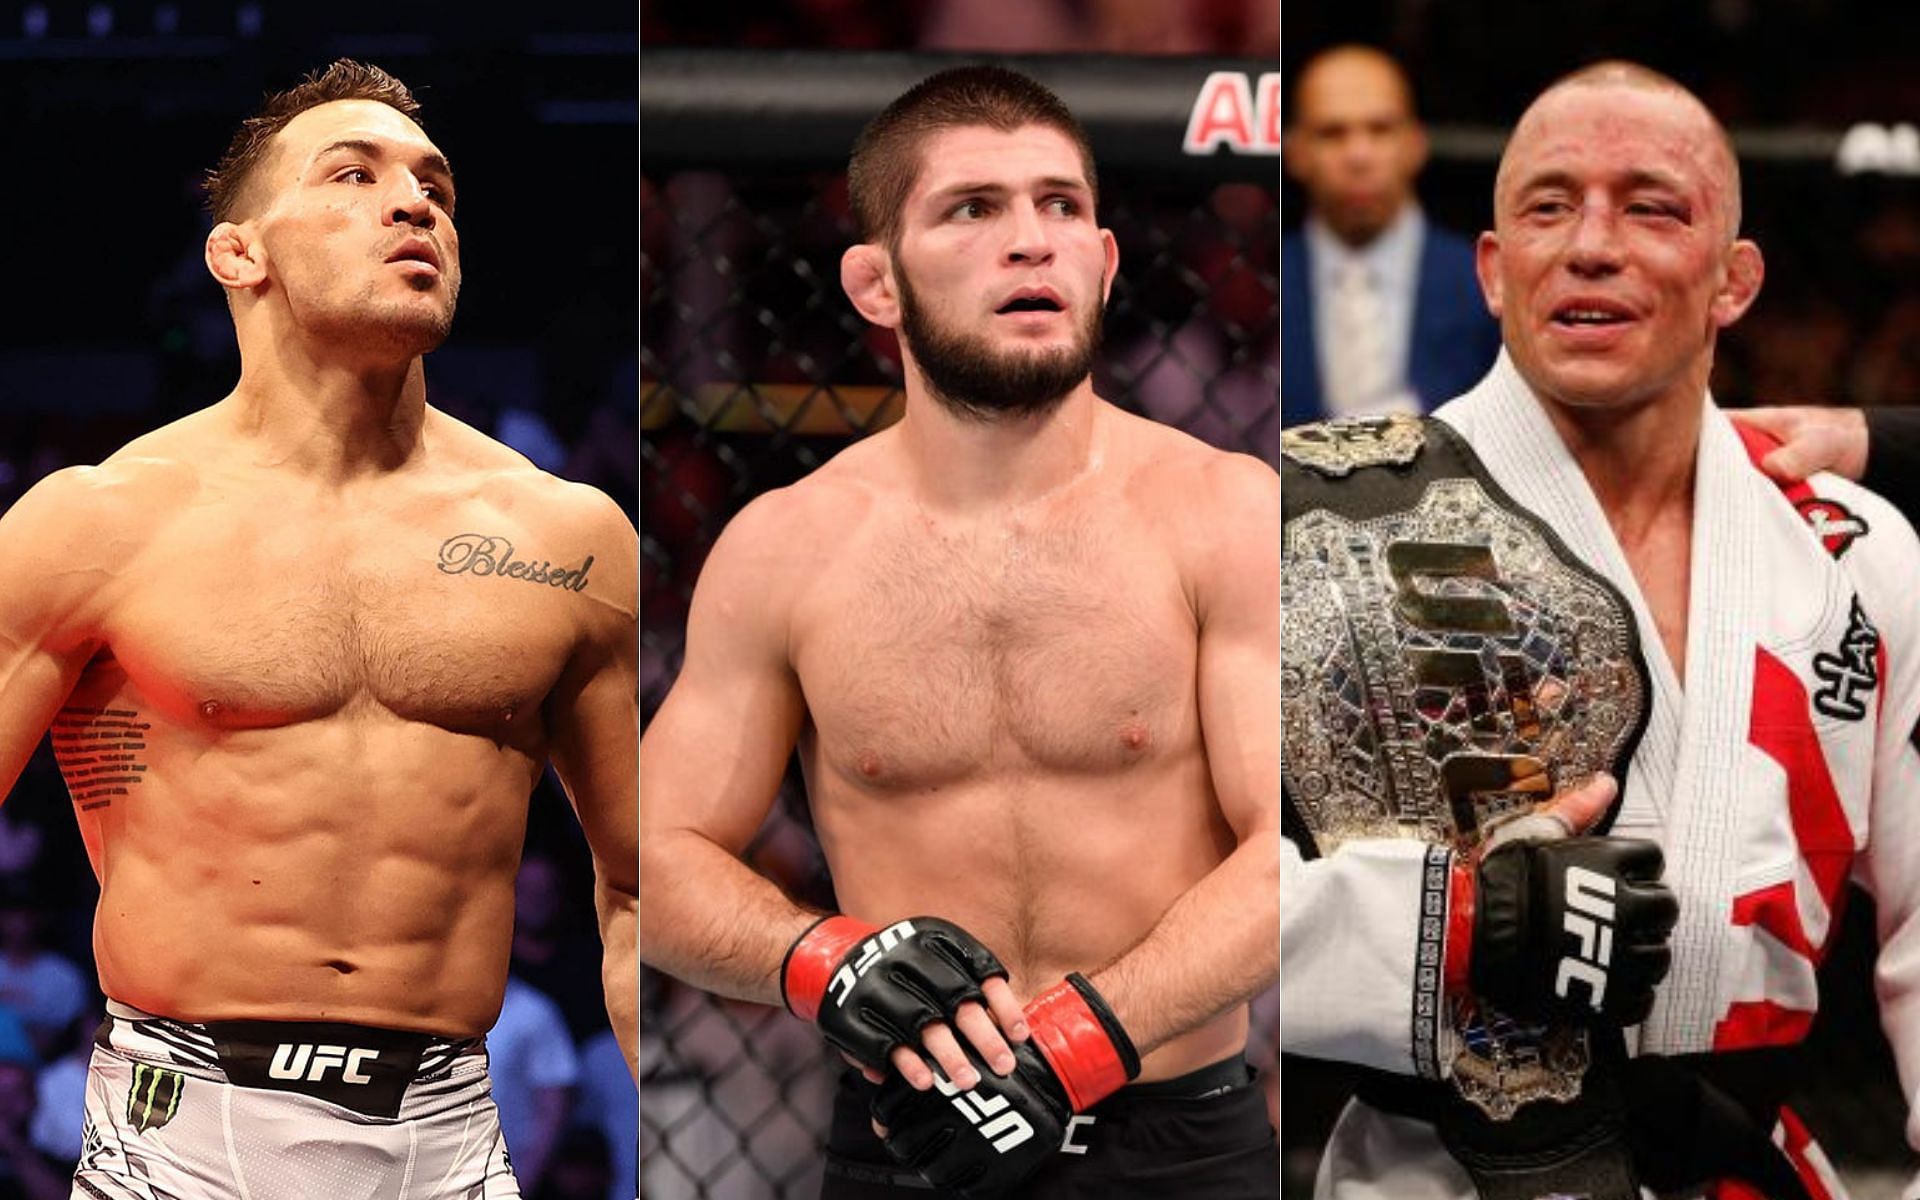 UFC fans missed out on Khabib Nurmagomedov facing Michael Chandler and Georges St-Pierre